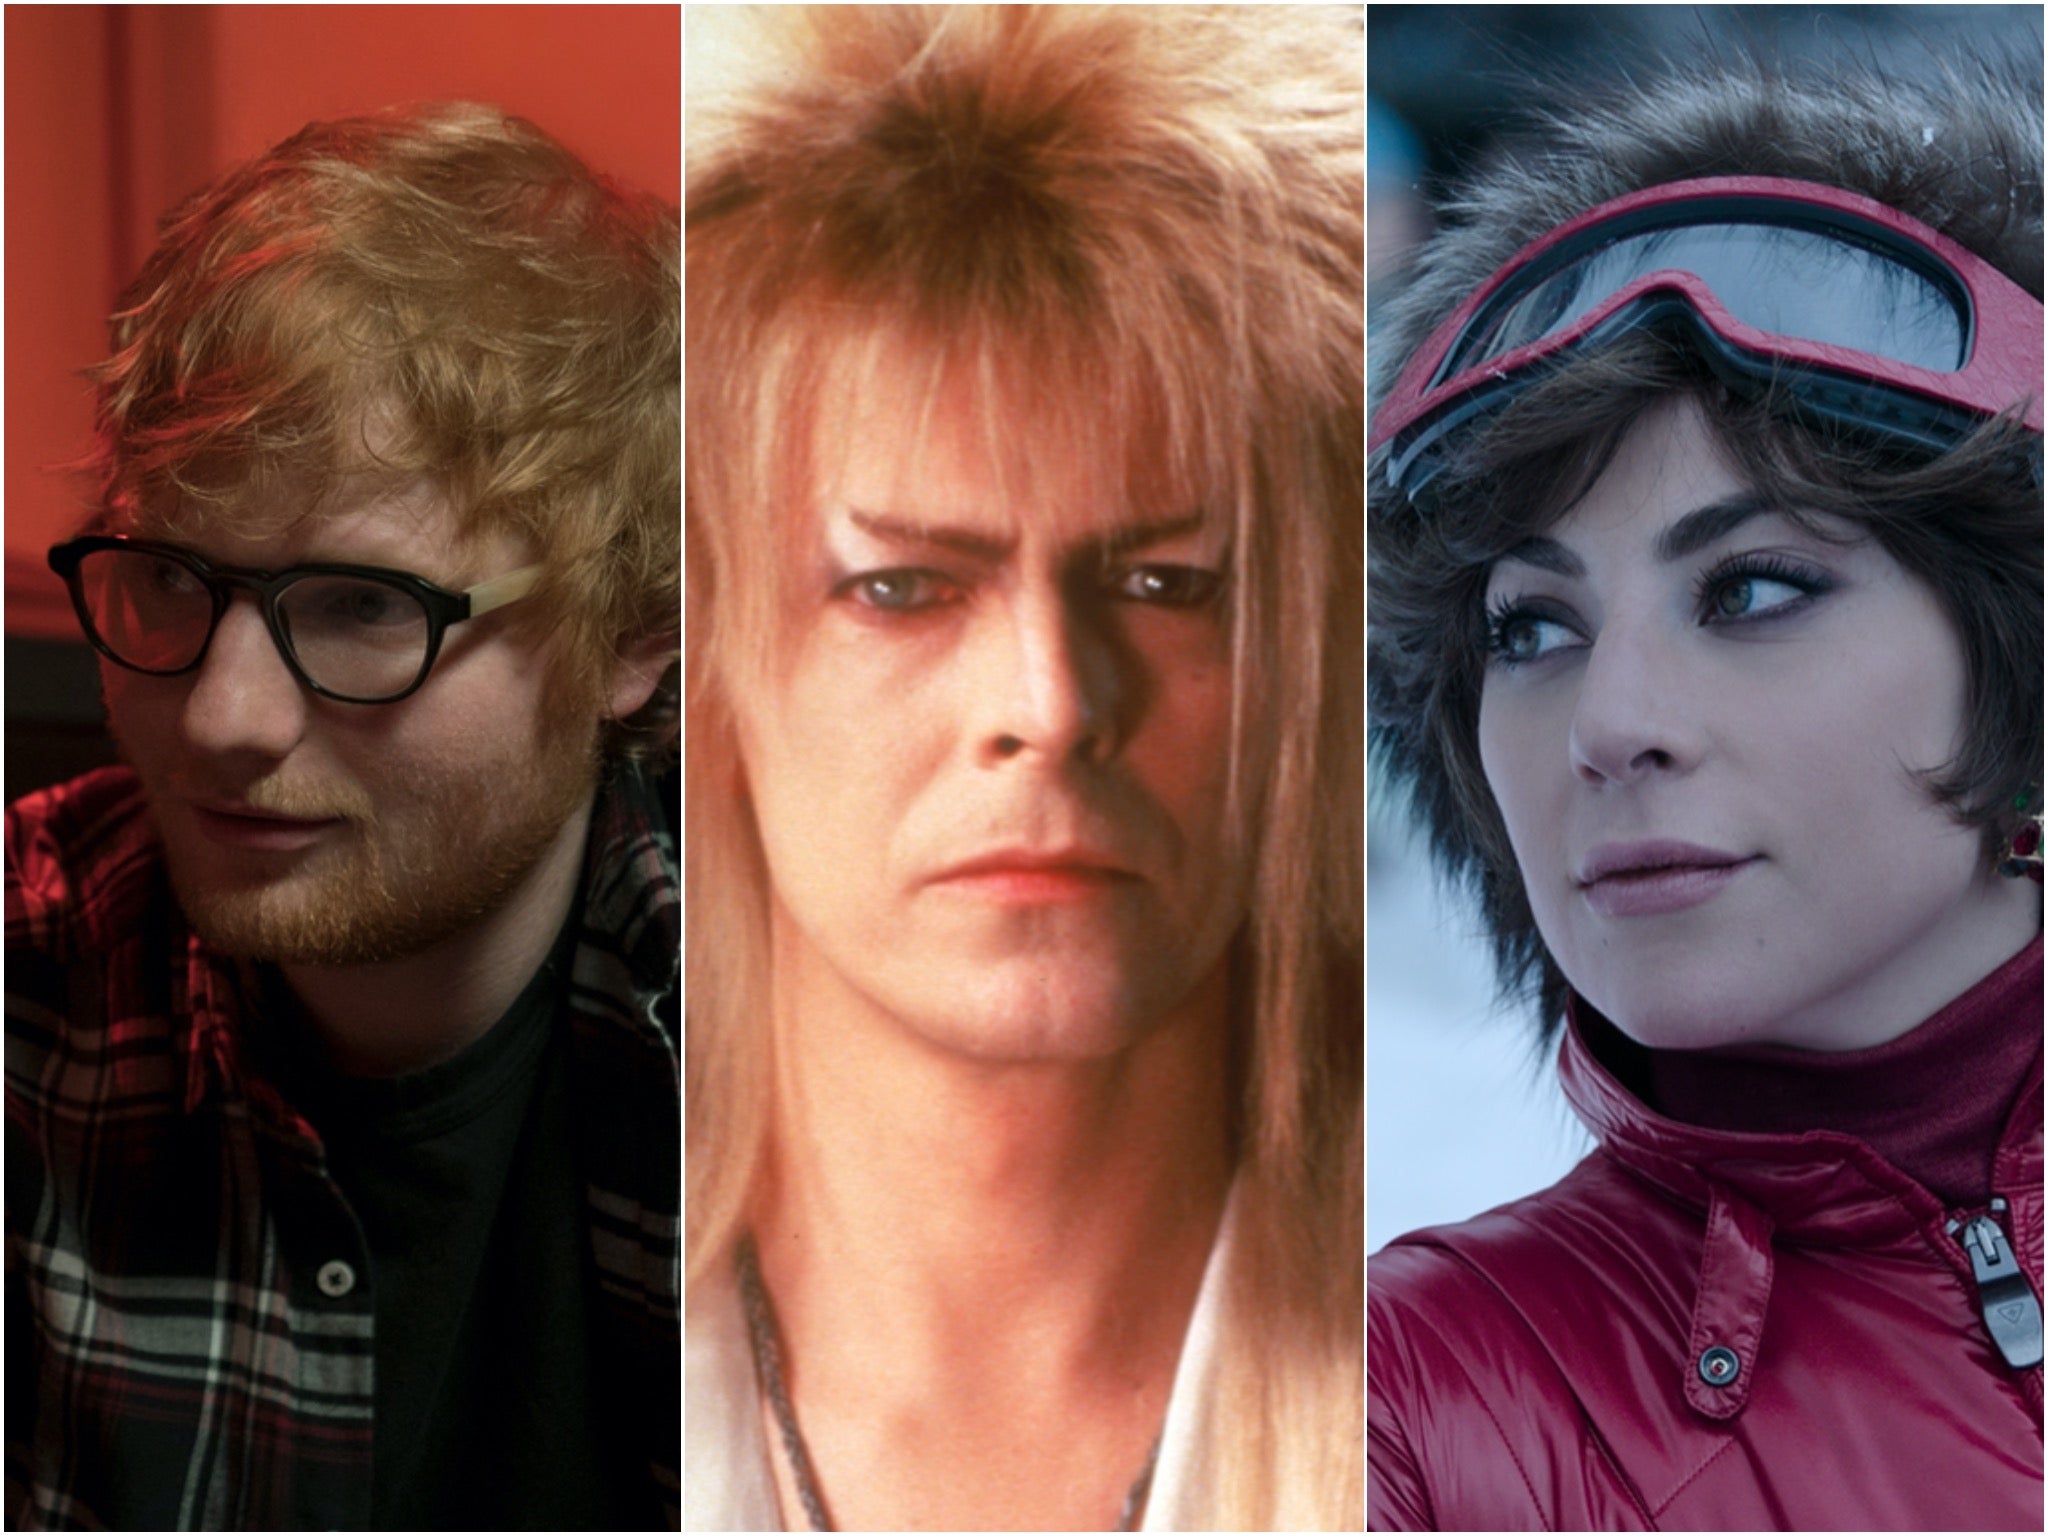 Where pop meets movies: Ed Sheeran in ‘Yesterday’, David Bowie in ‘Labyrinth’ and Lady Gaga in ‘House of Gucci'